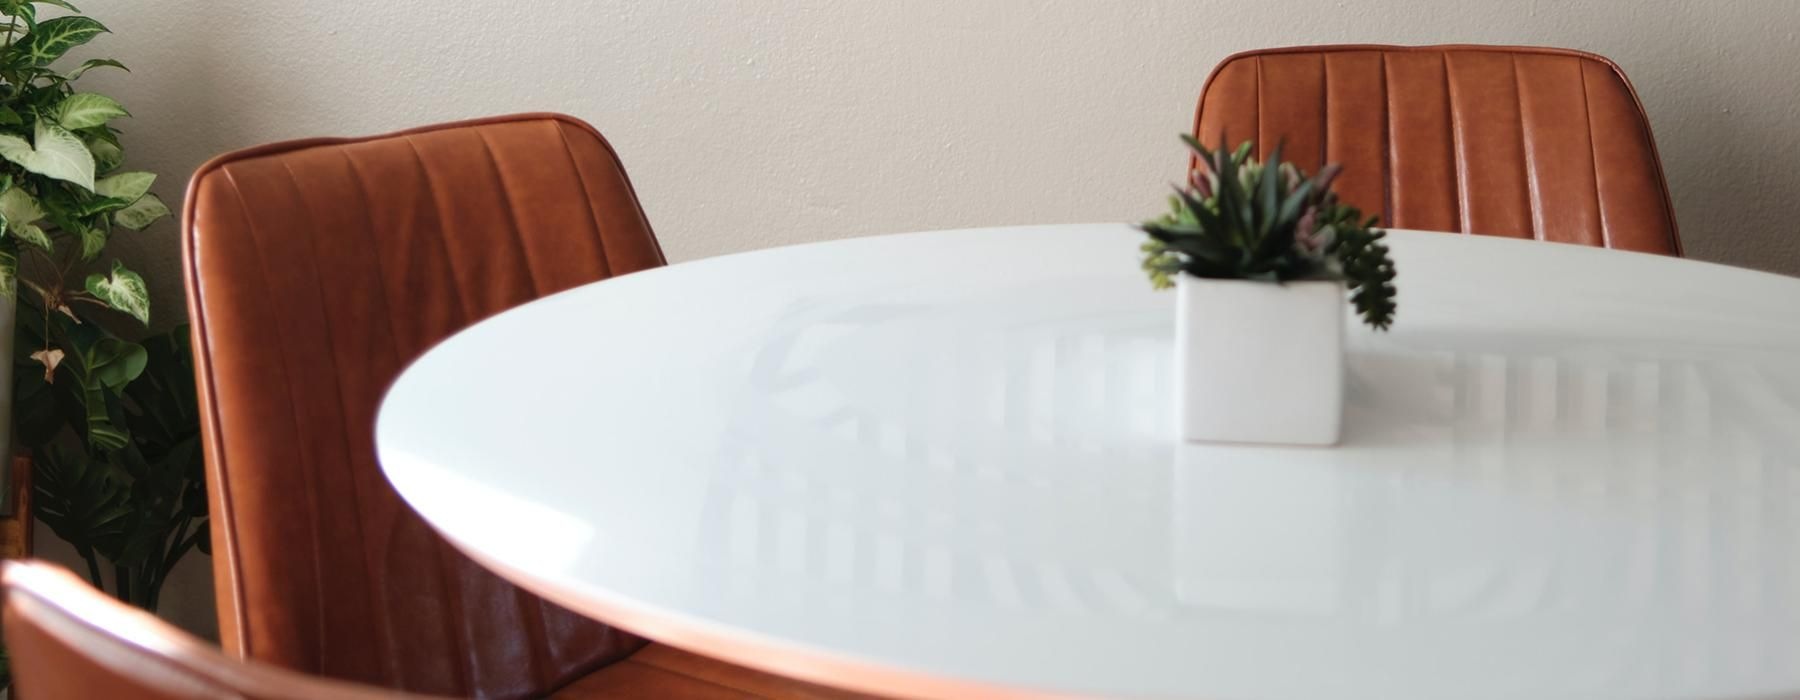 a table with a plant on it